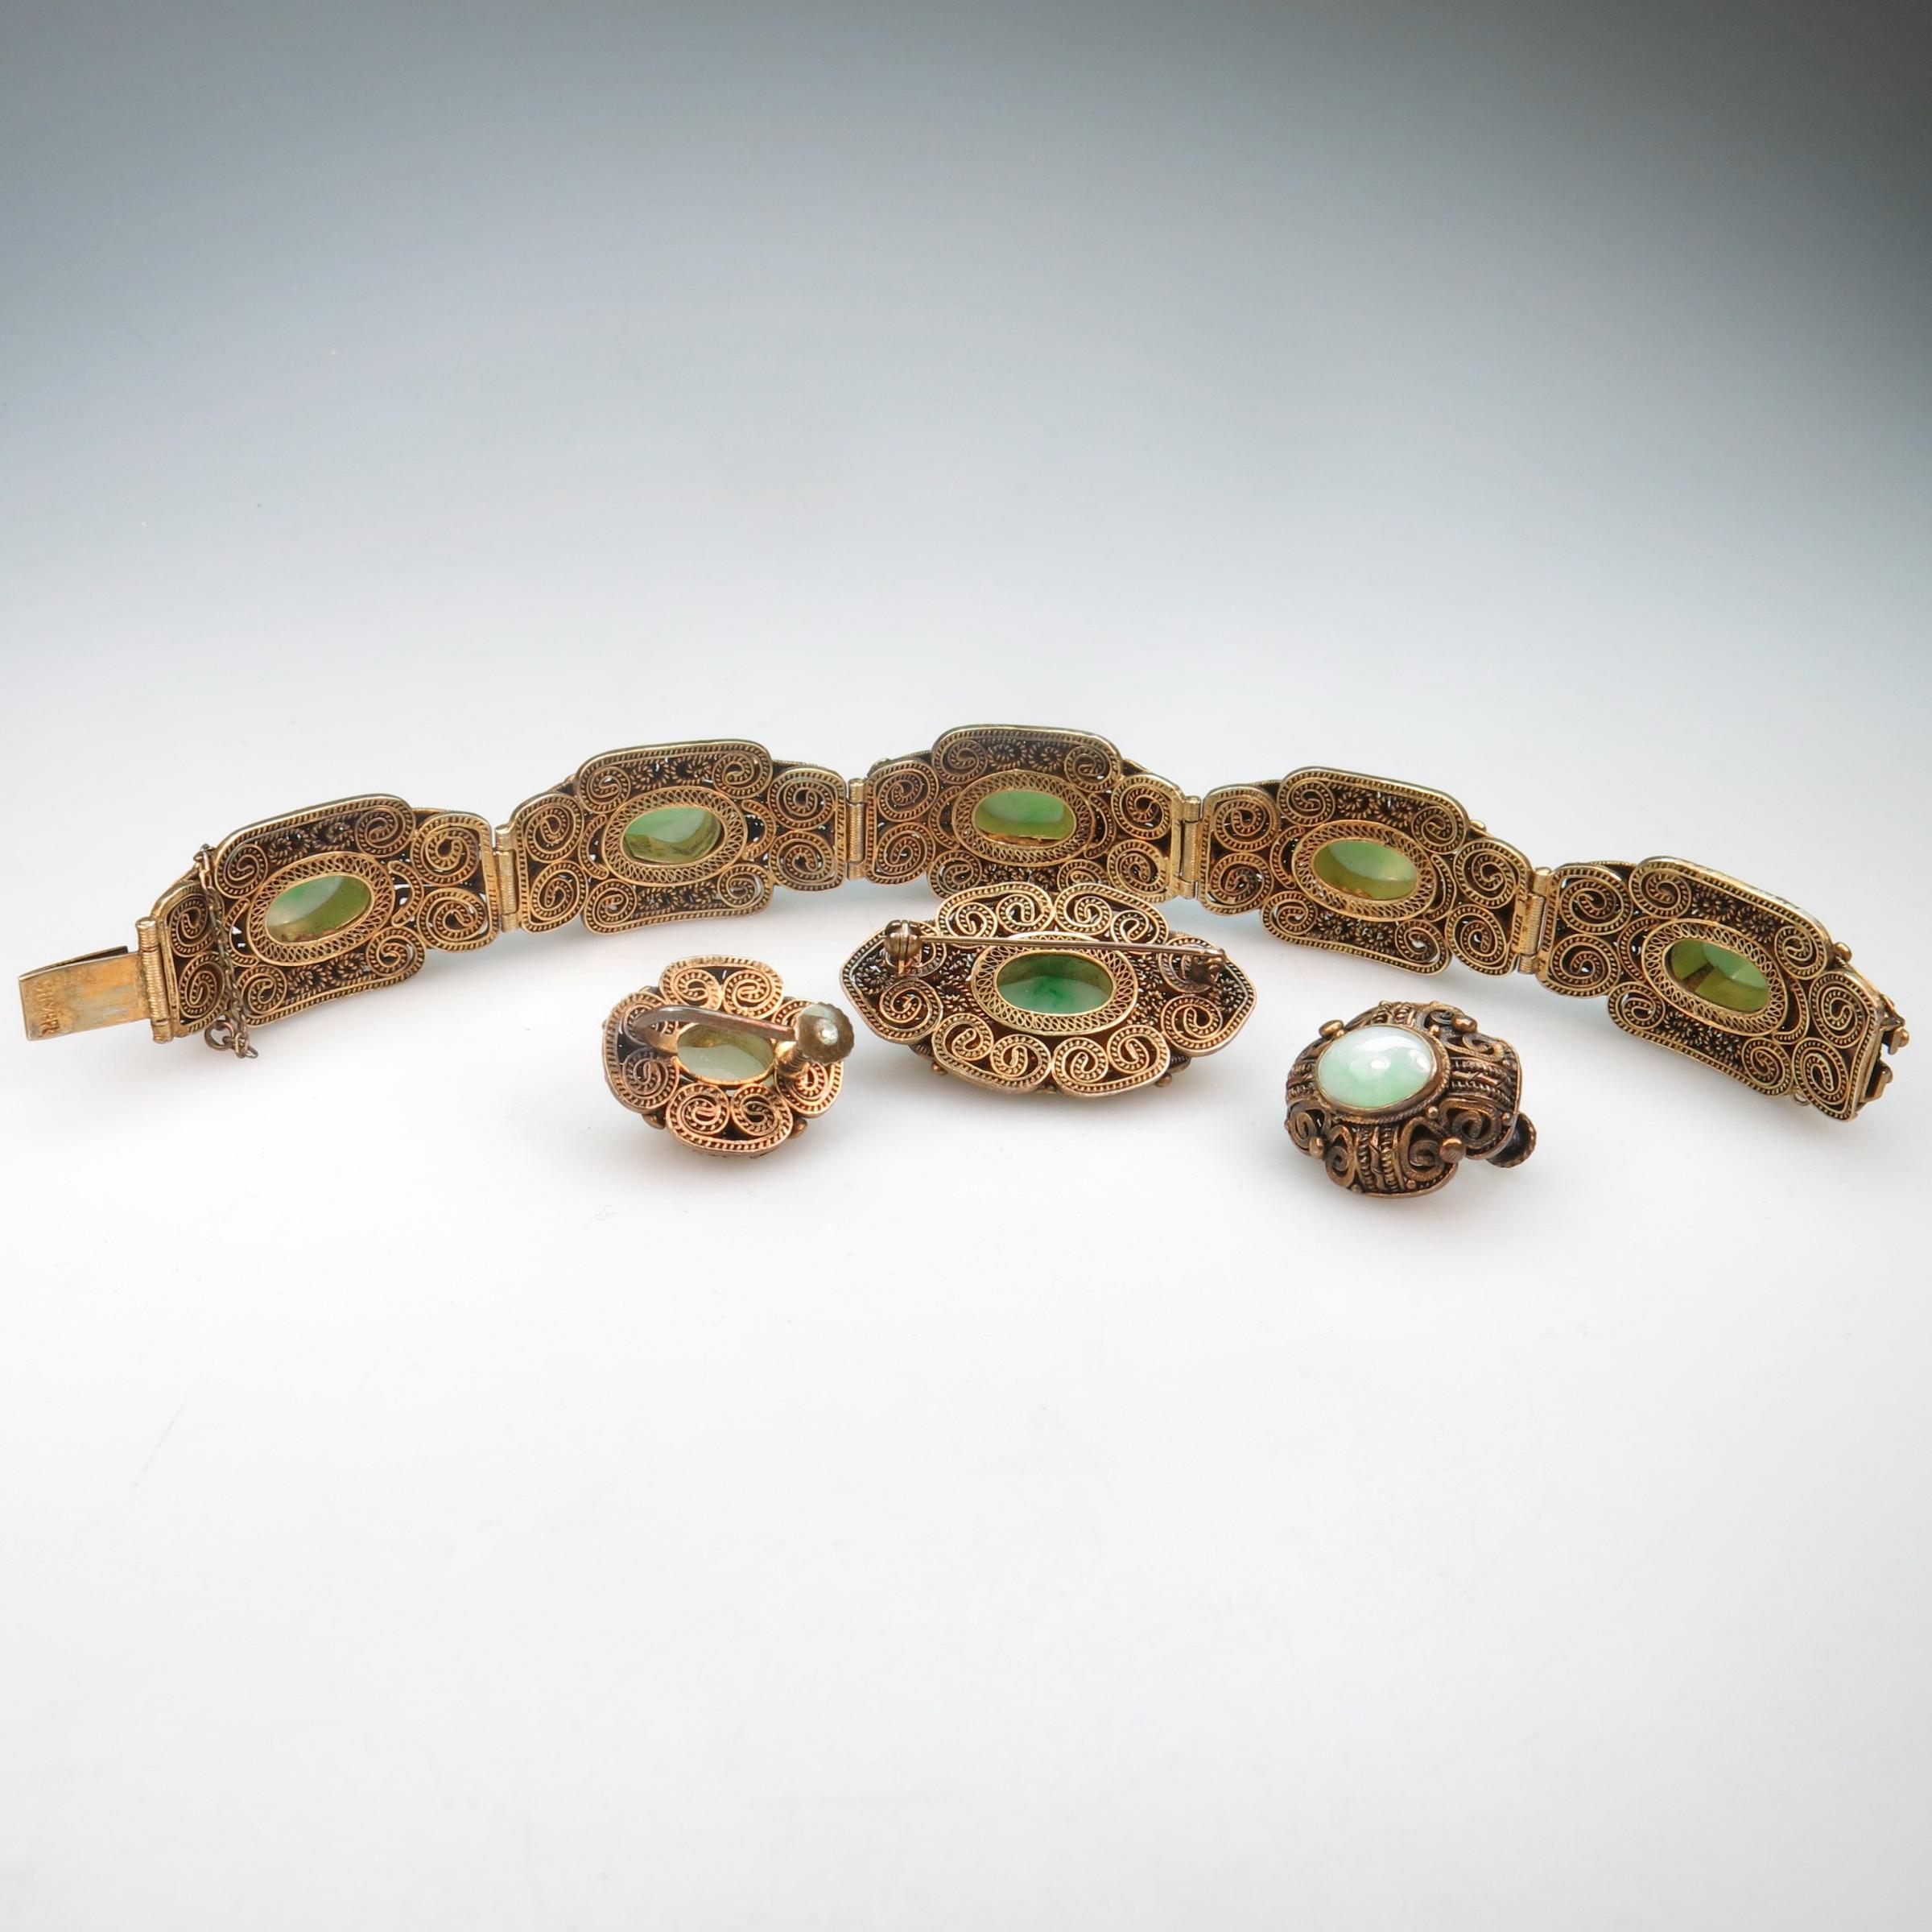 4-Piece Chinese Silver Gilt Filigree Suite